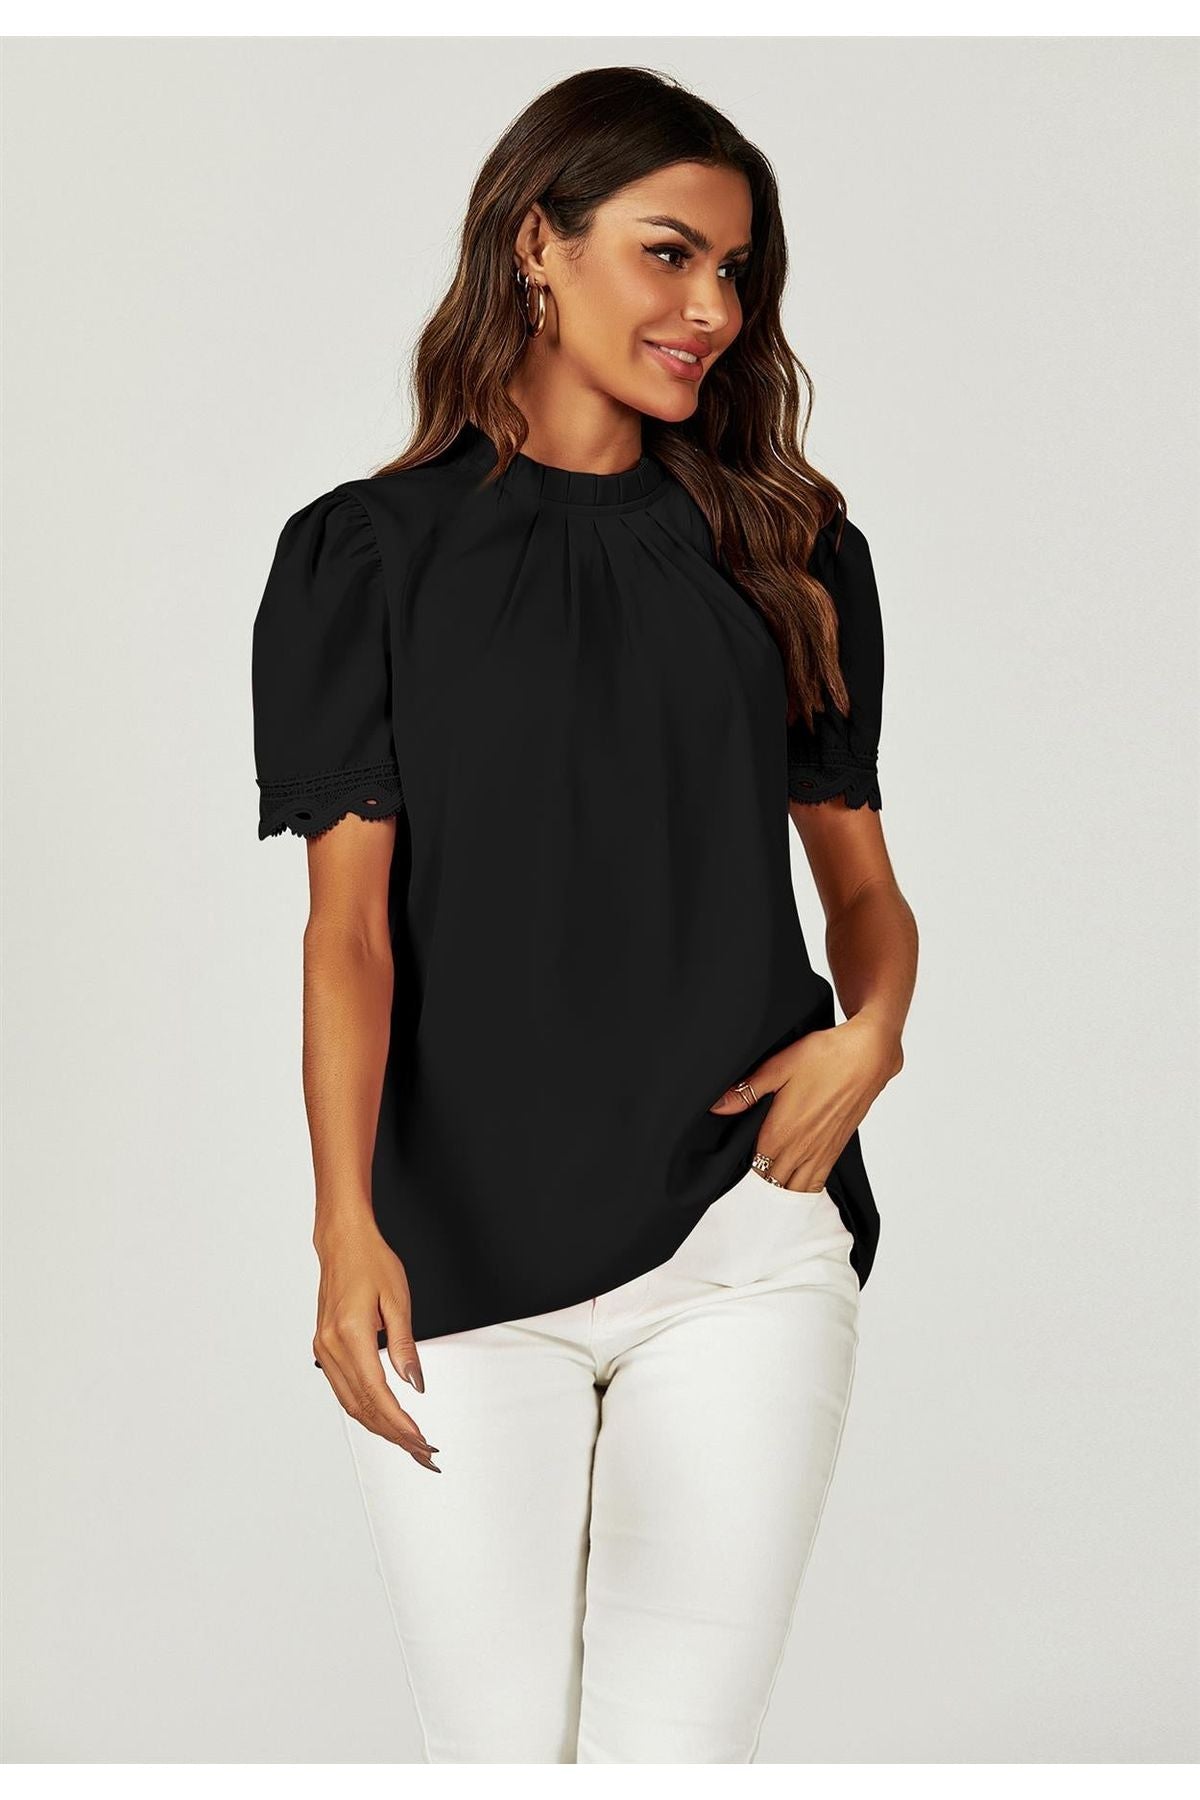 Lace Trim Detail Short Sleeve High Neck Blouse Top In Black FS659